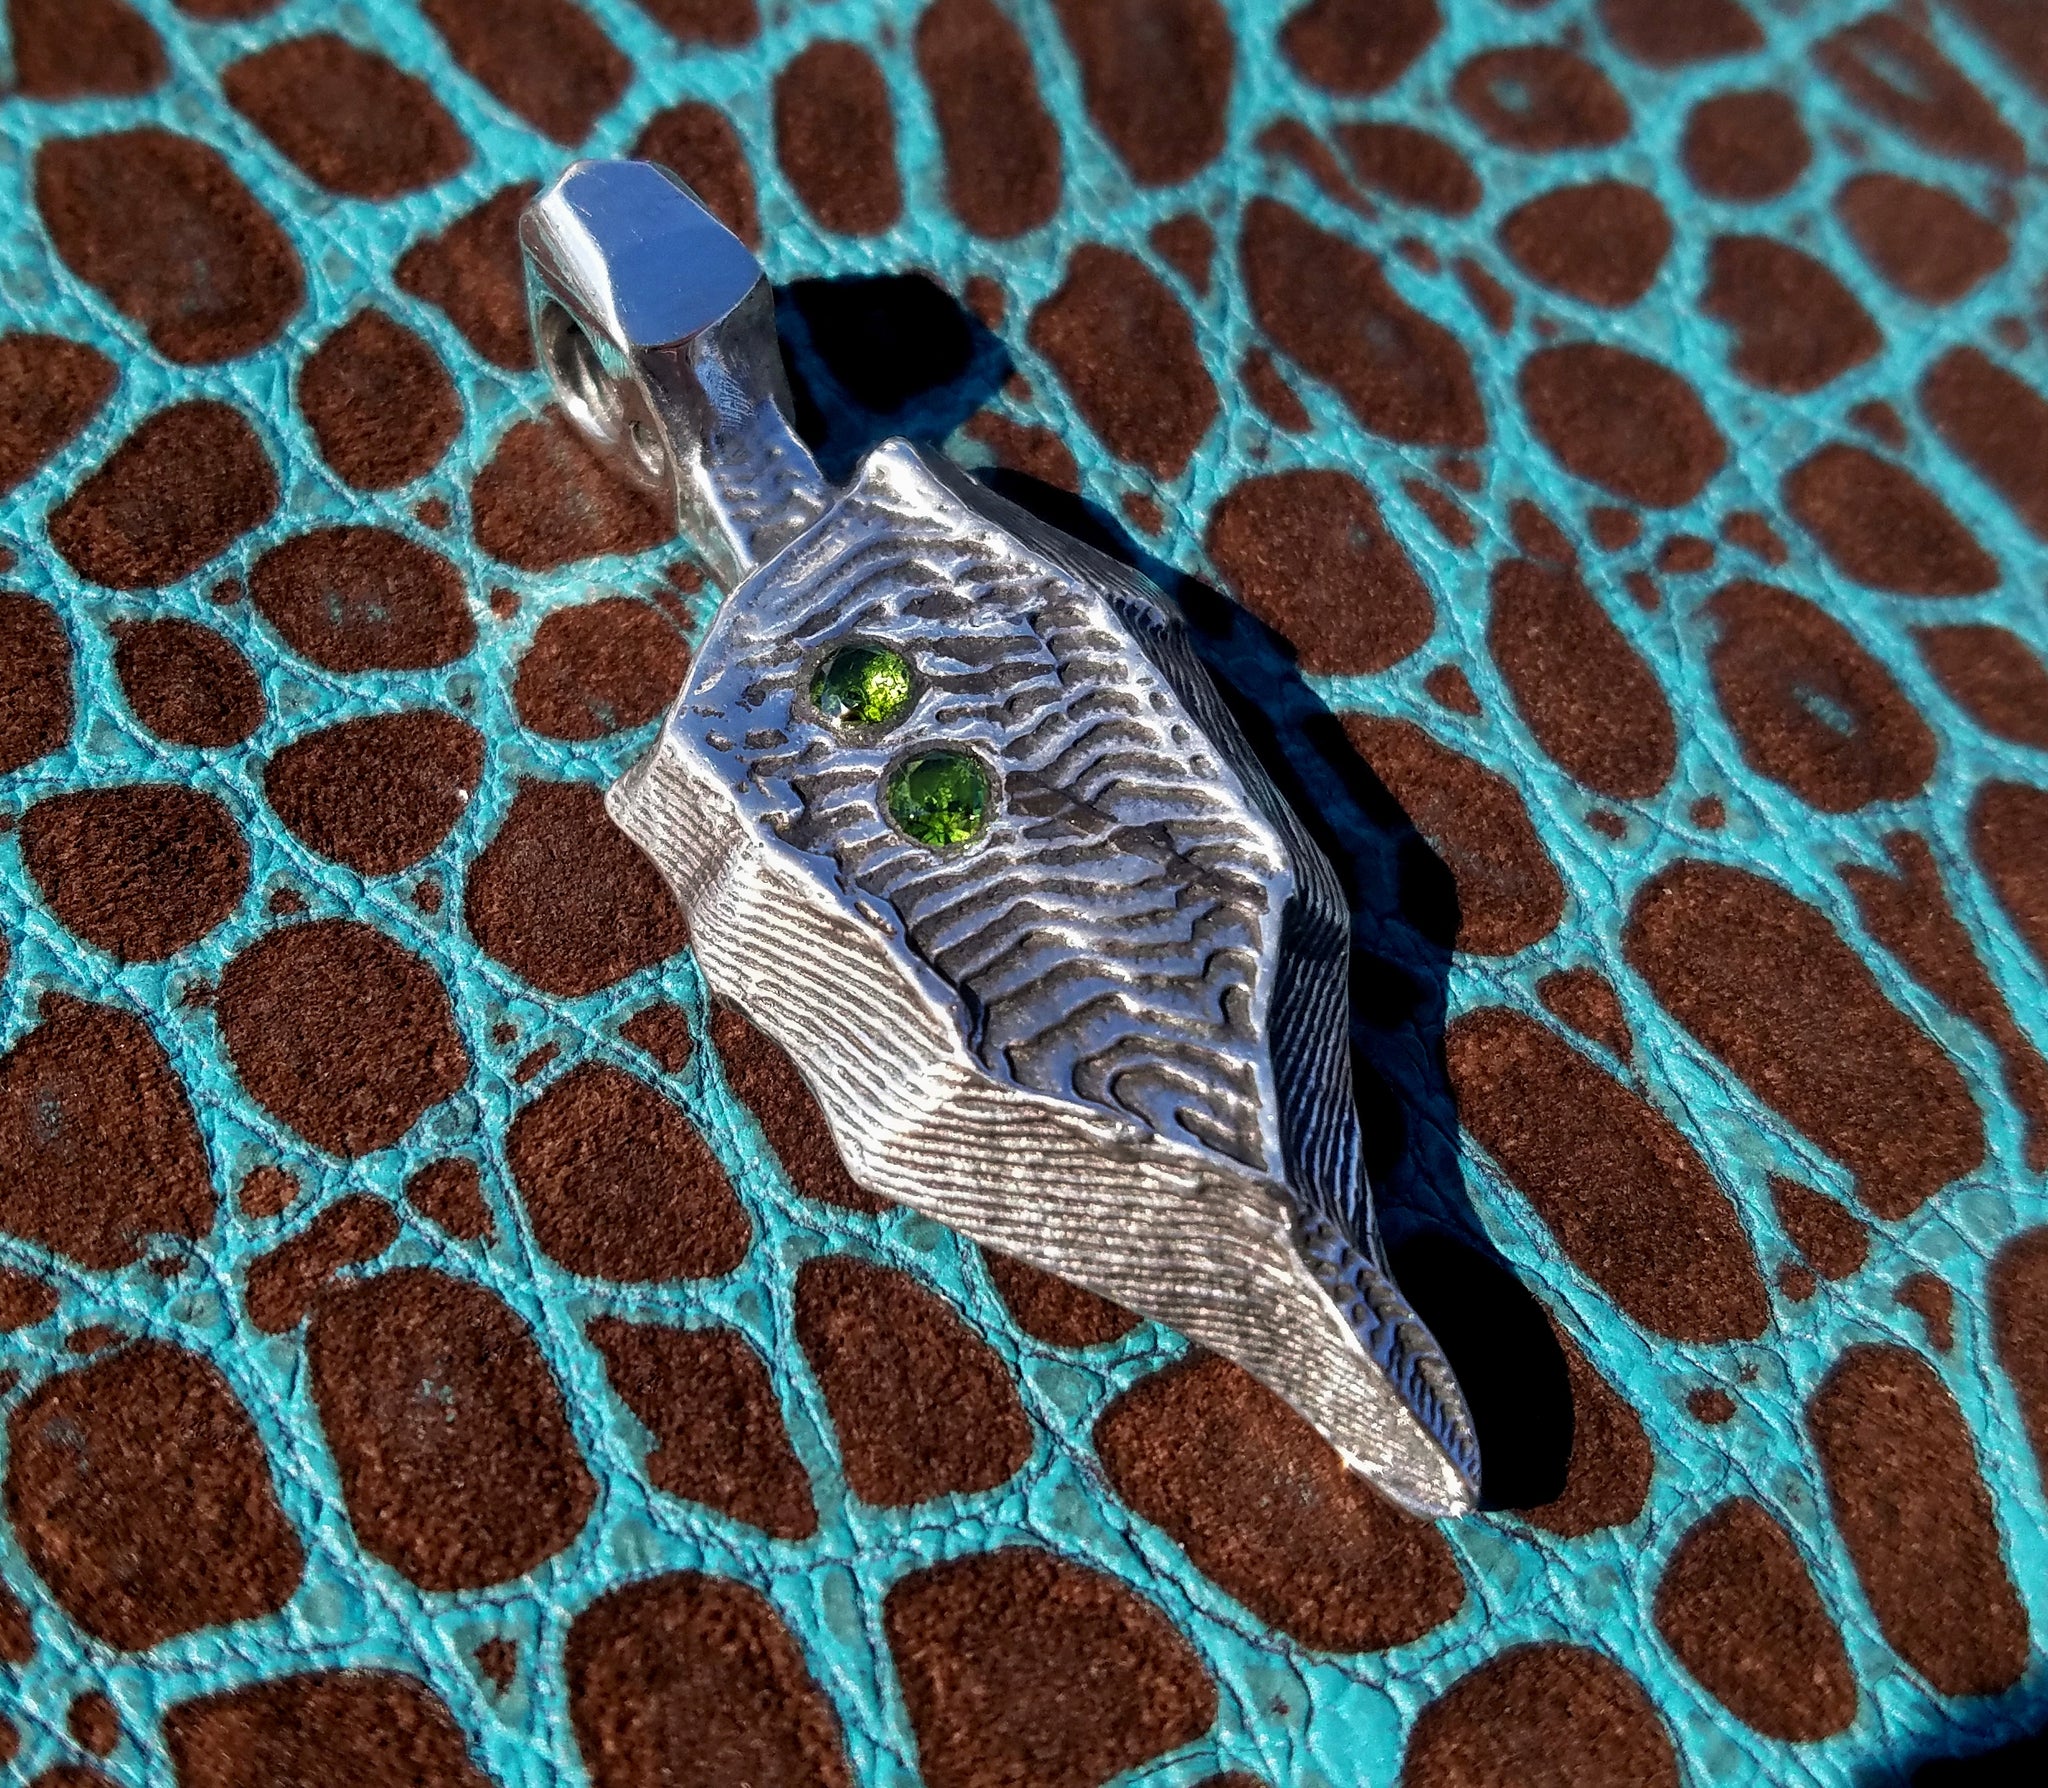 'Alien Seed' Hand-carved Hand-poured Cuttlefish Cast Pendant #5